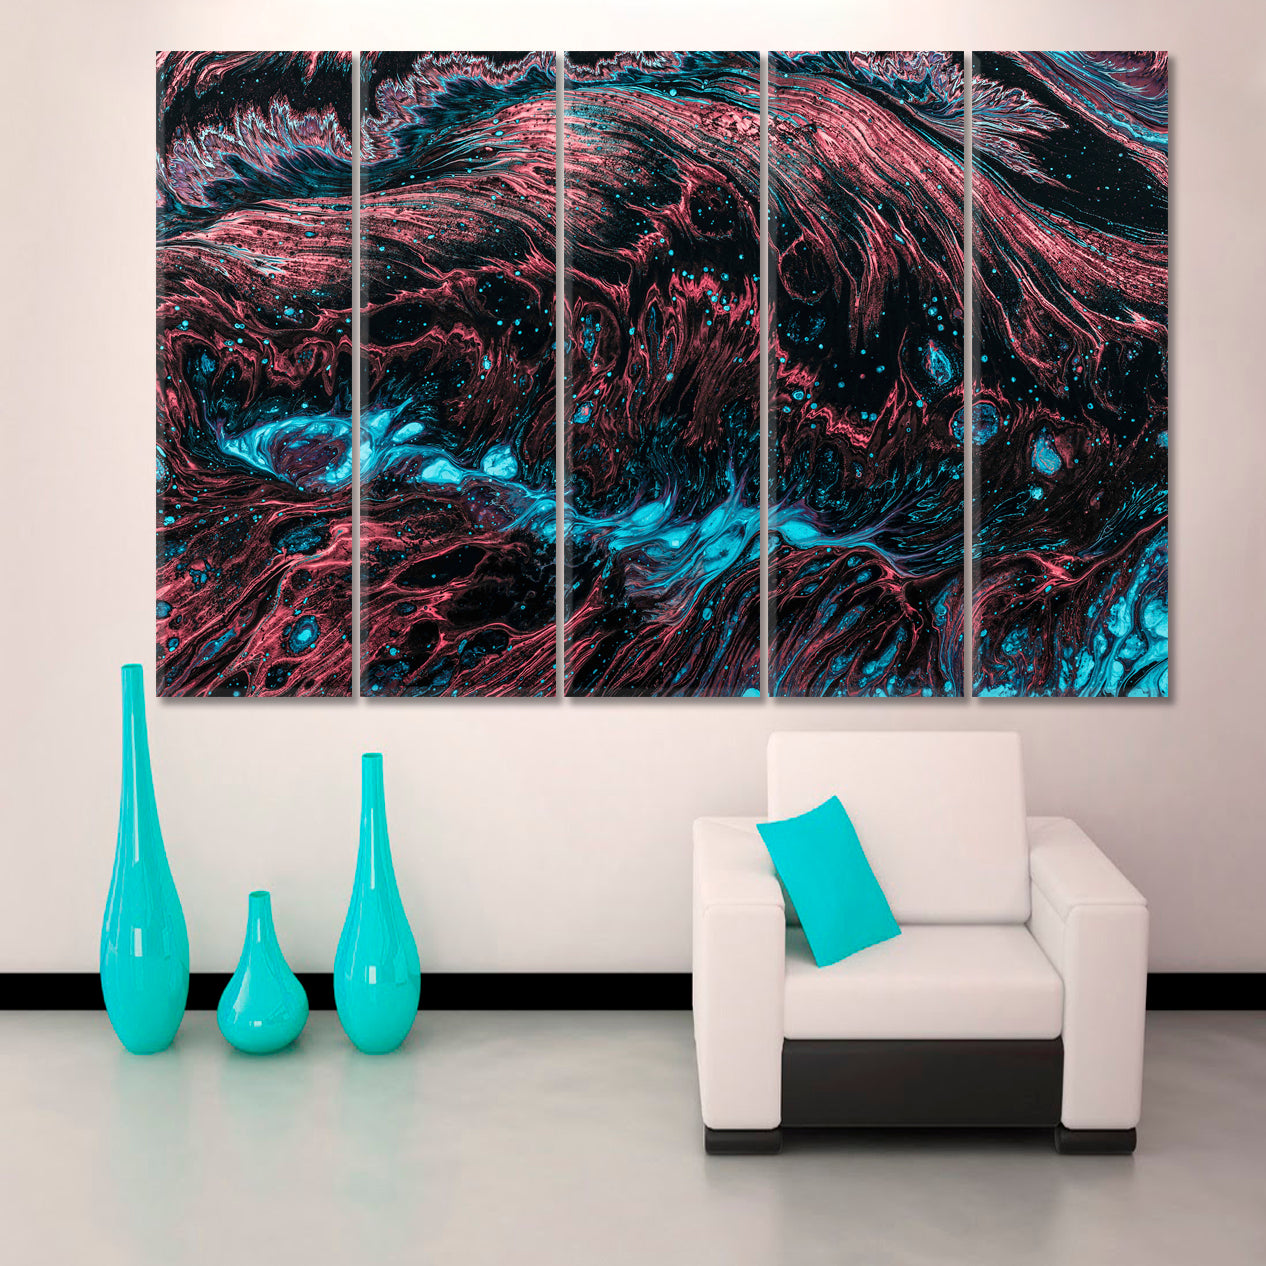 FRACTAL Turquoise Coral Black Abstract Creative Pattern Abstract Art Print Artesty 5 panels 36" x 24" 